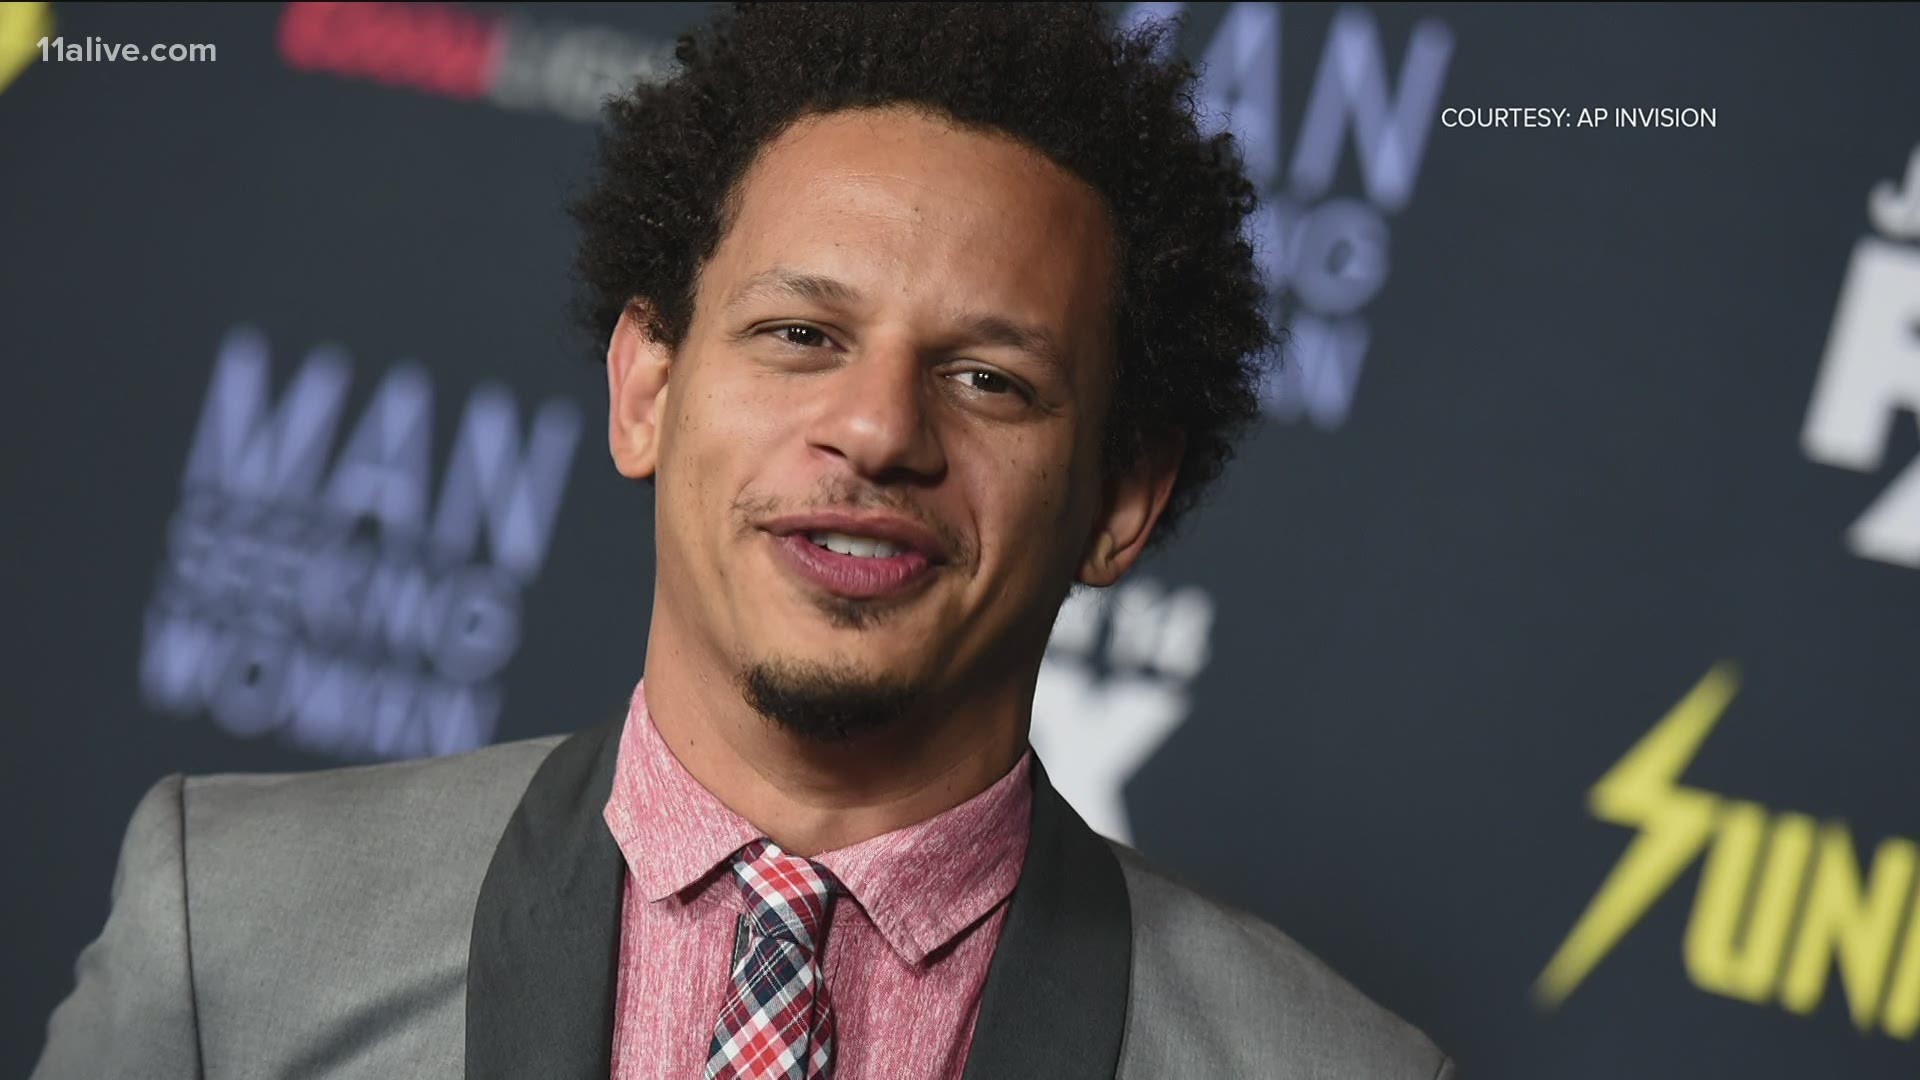 In a statement, Clayton County Police said they had a "consensual encounter" with Eric Andre. However, he says didn't volunteer to a search.